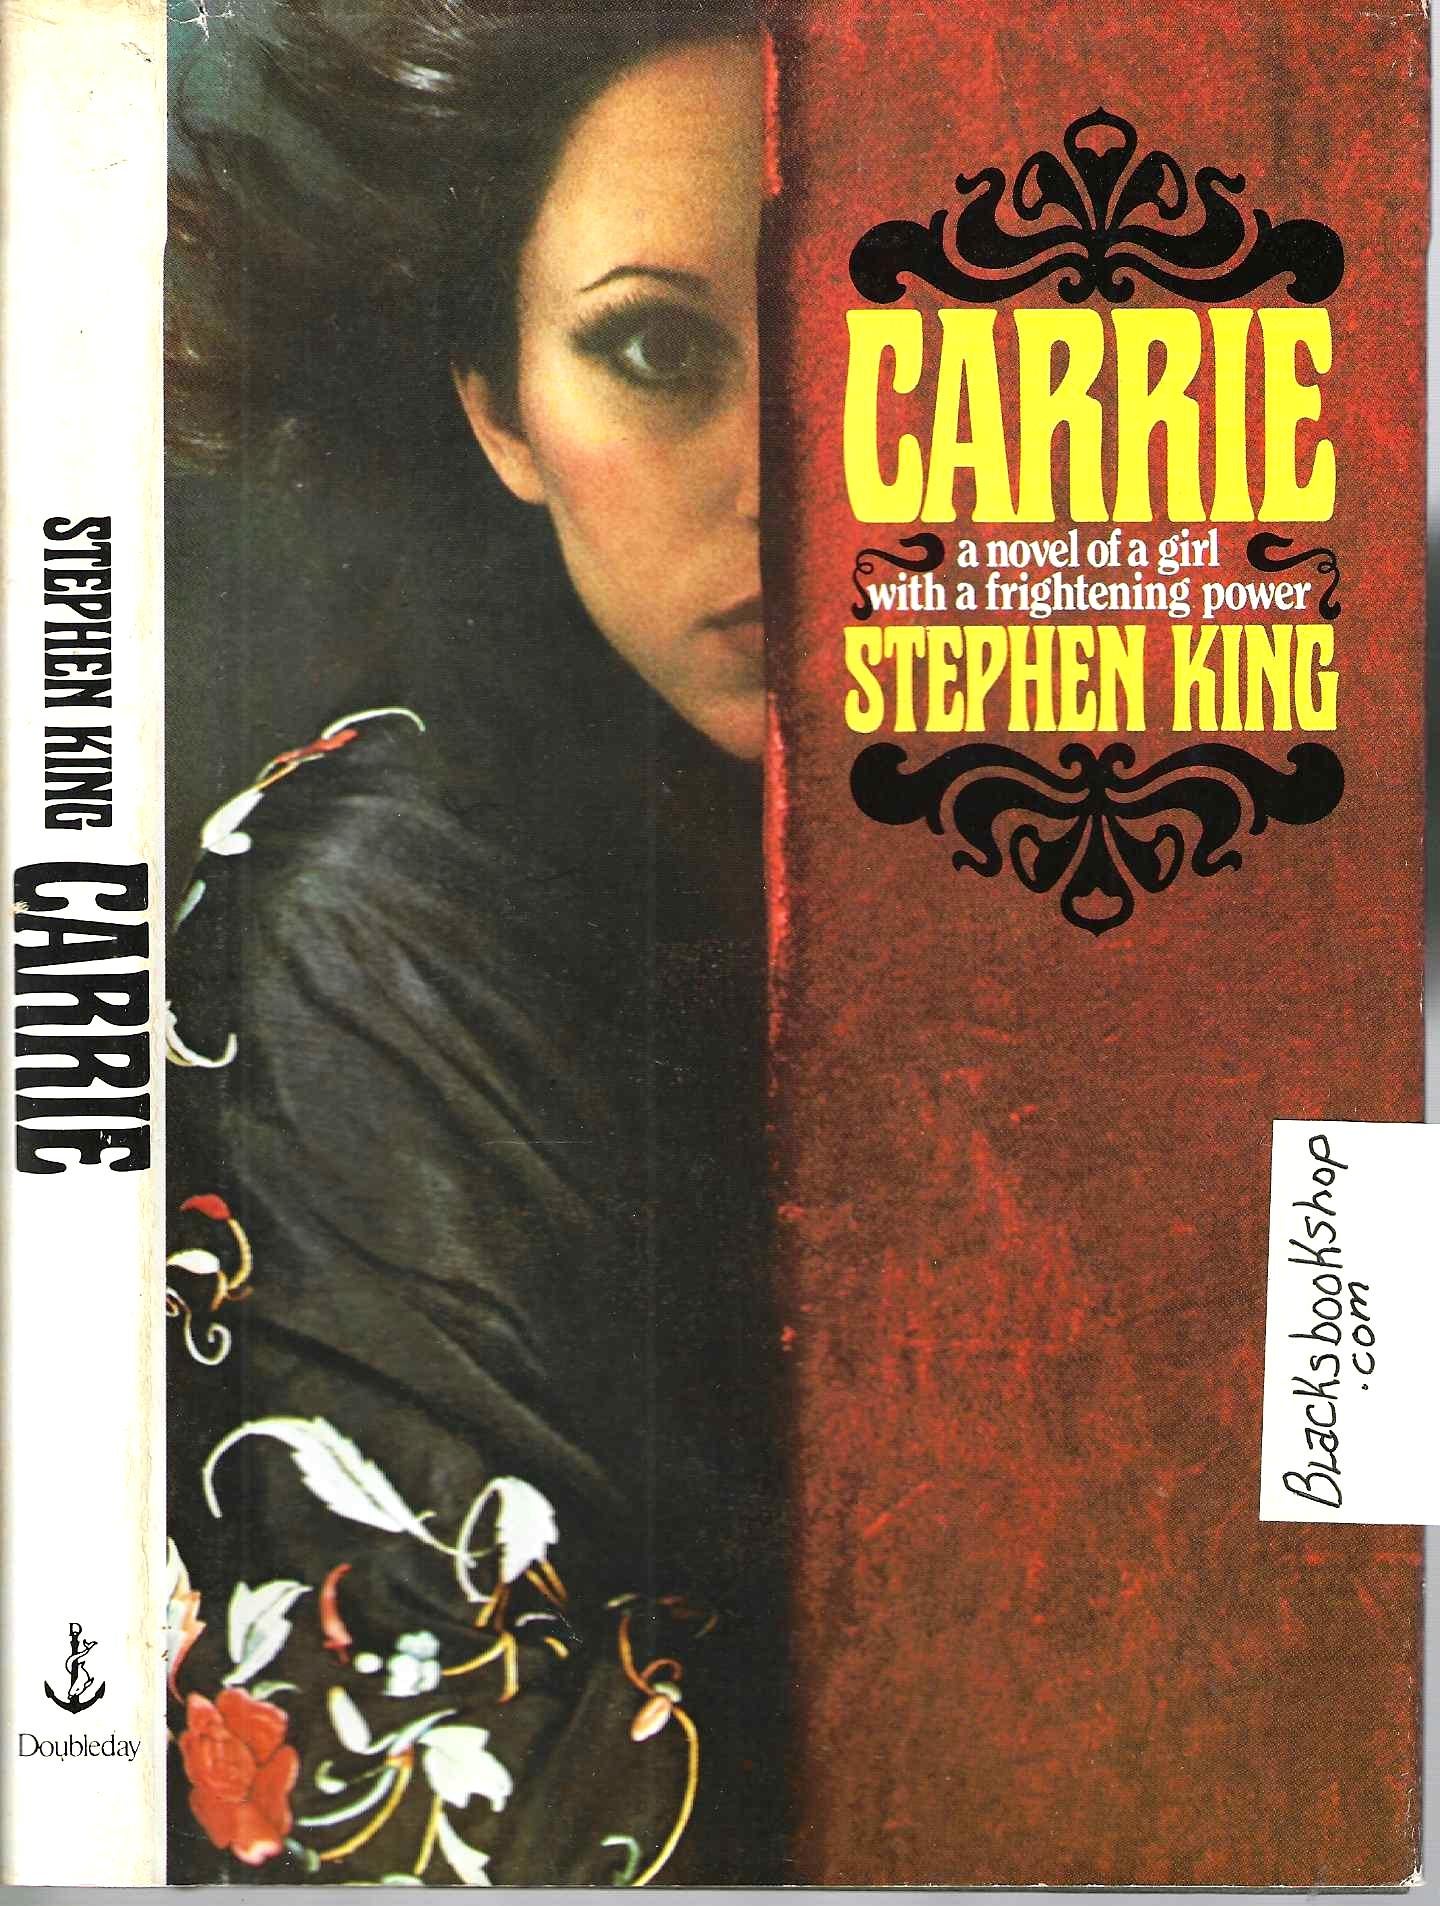 Carrie by Stephen King on Black's Bookshop